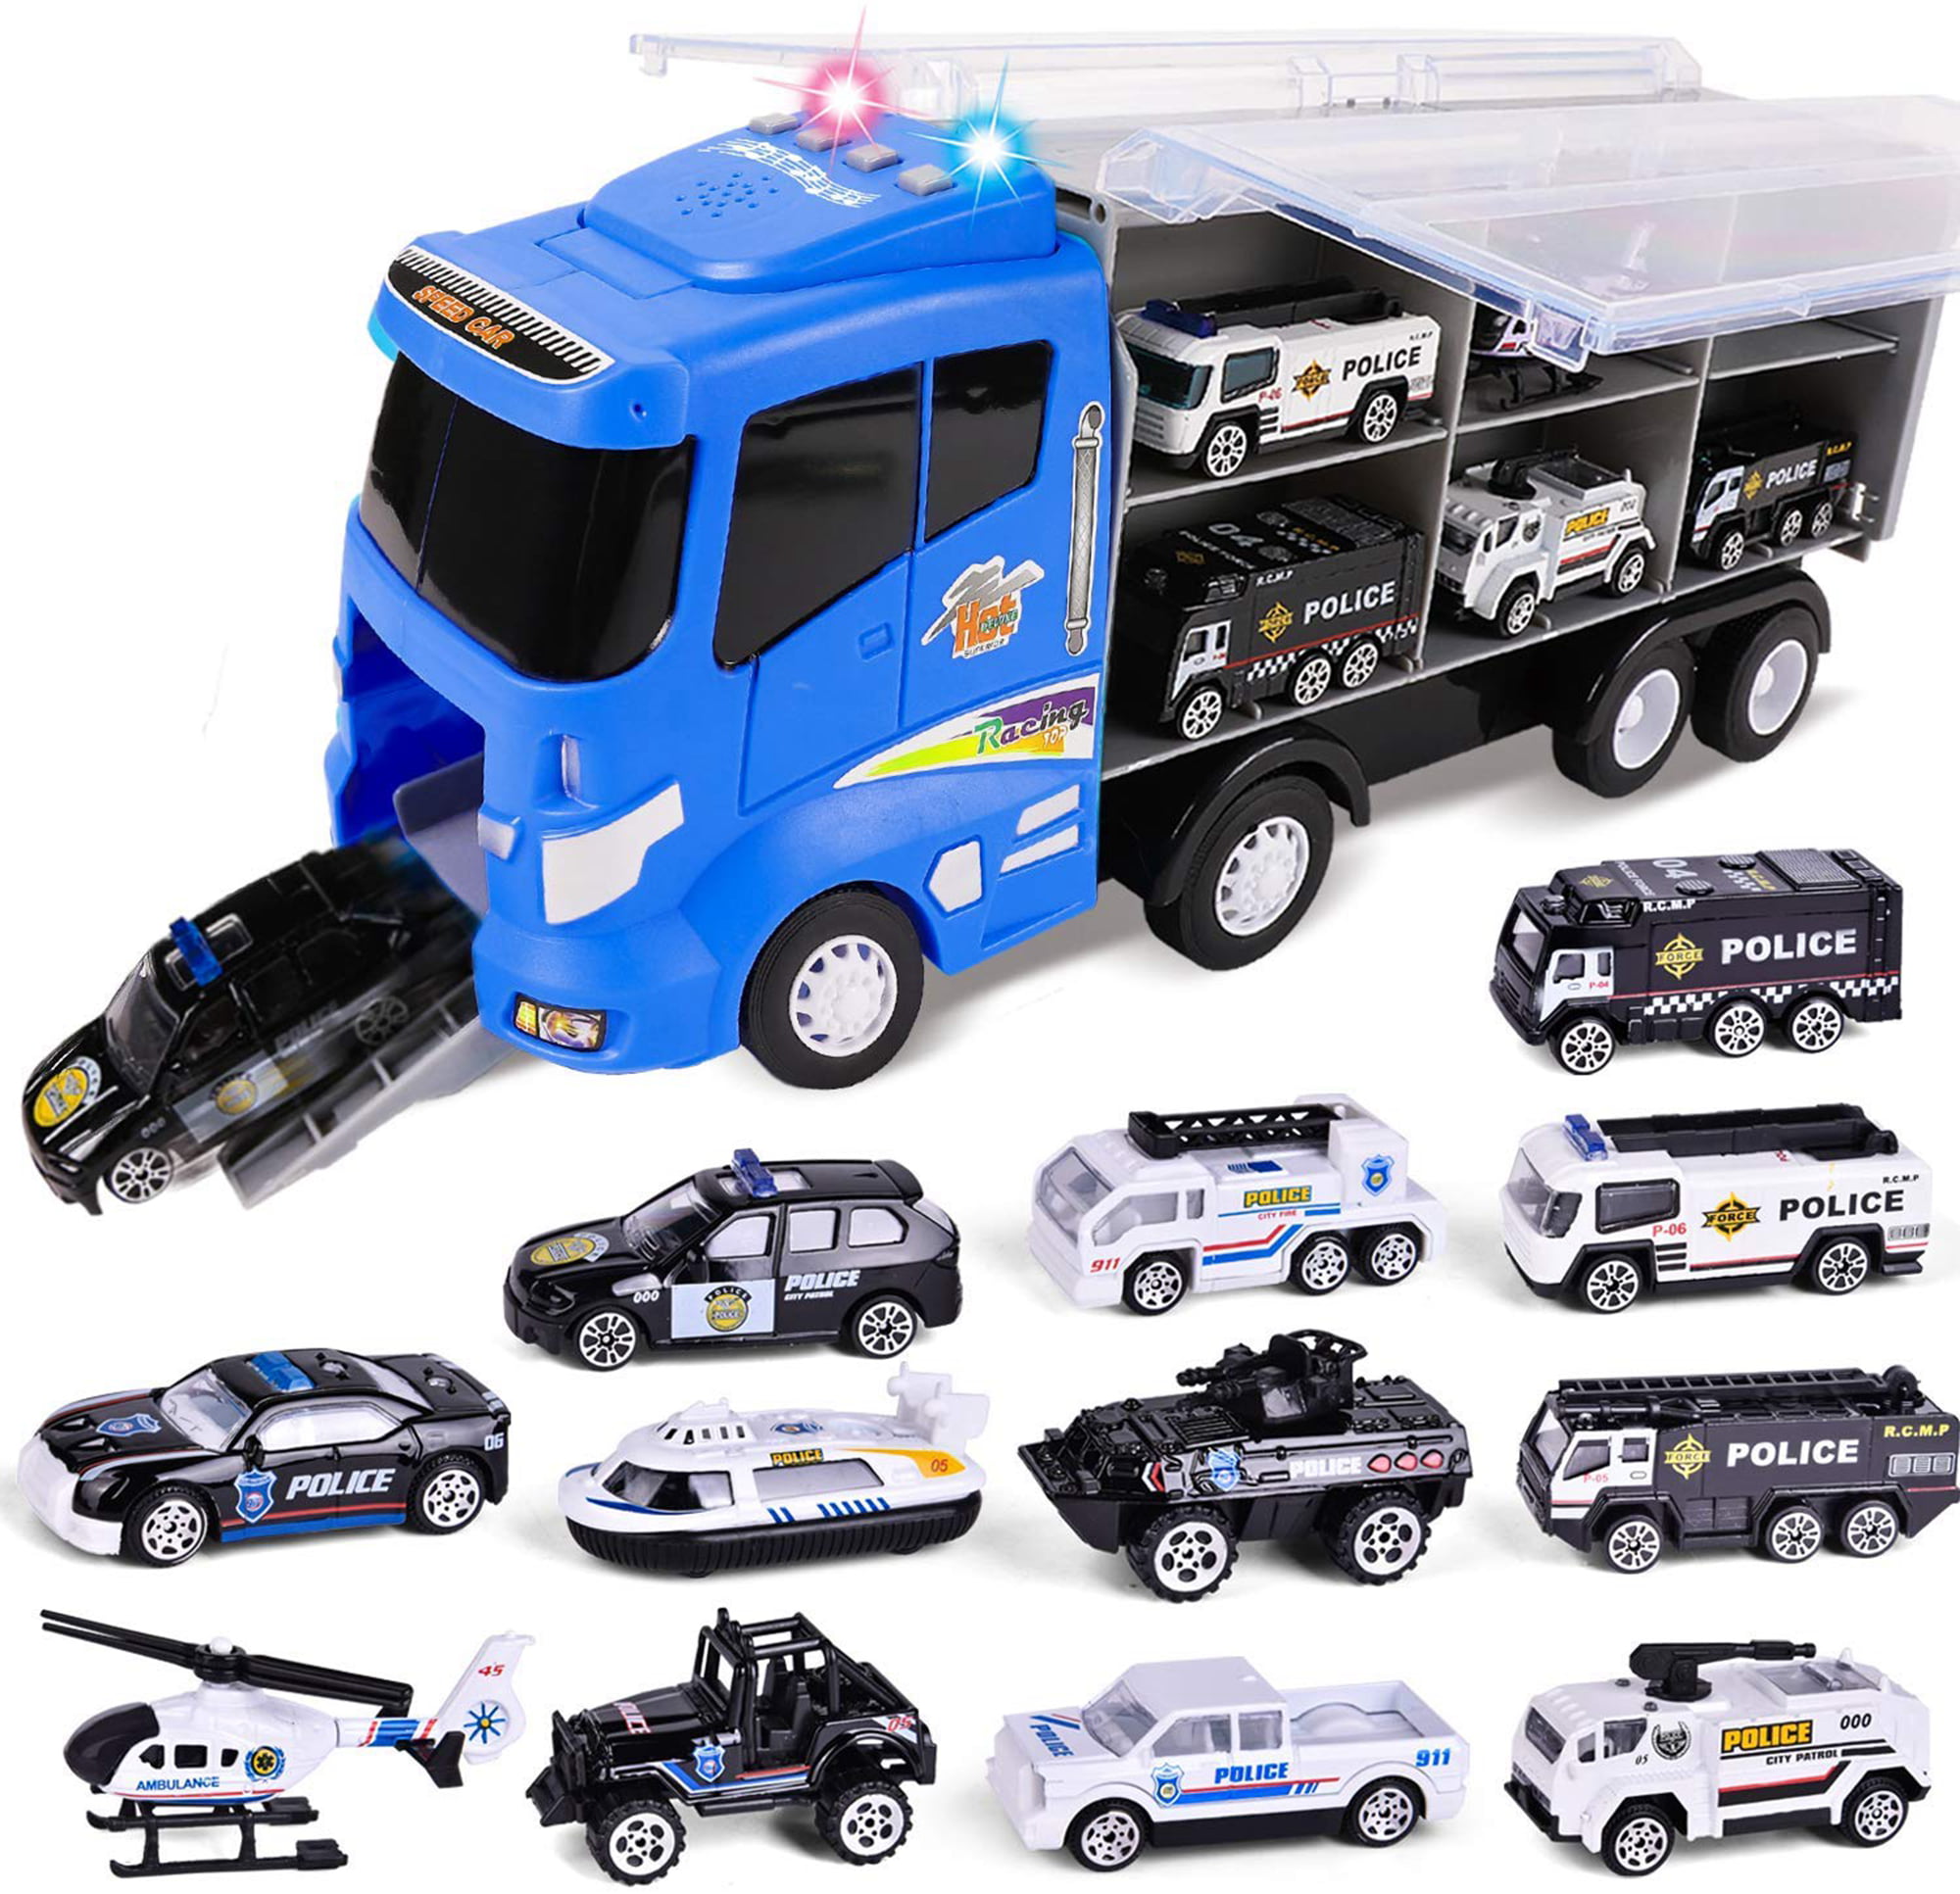 Police Helicopter Truck Transporter Small World Toys Vehicles friction powered